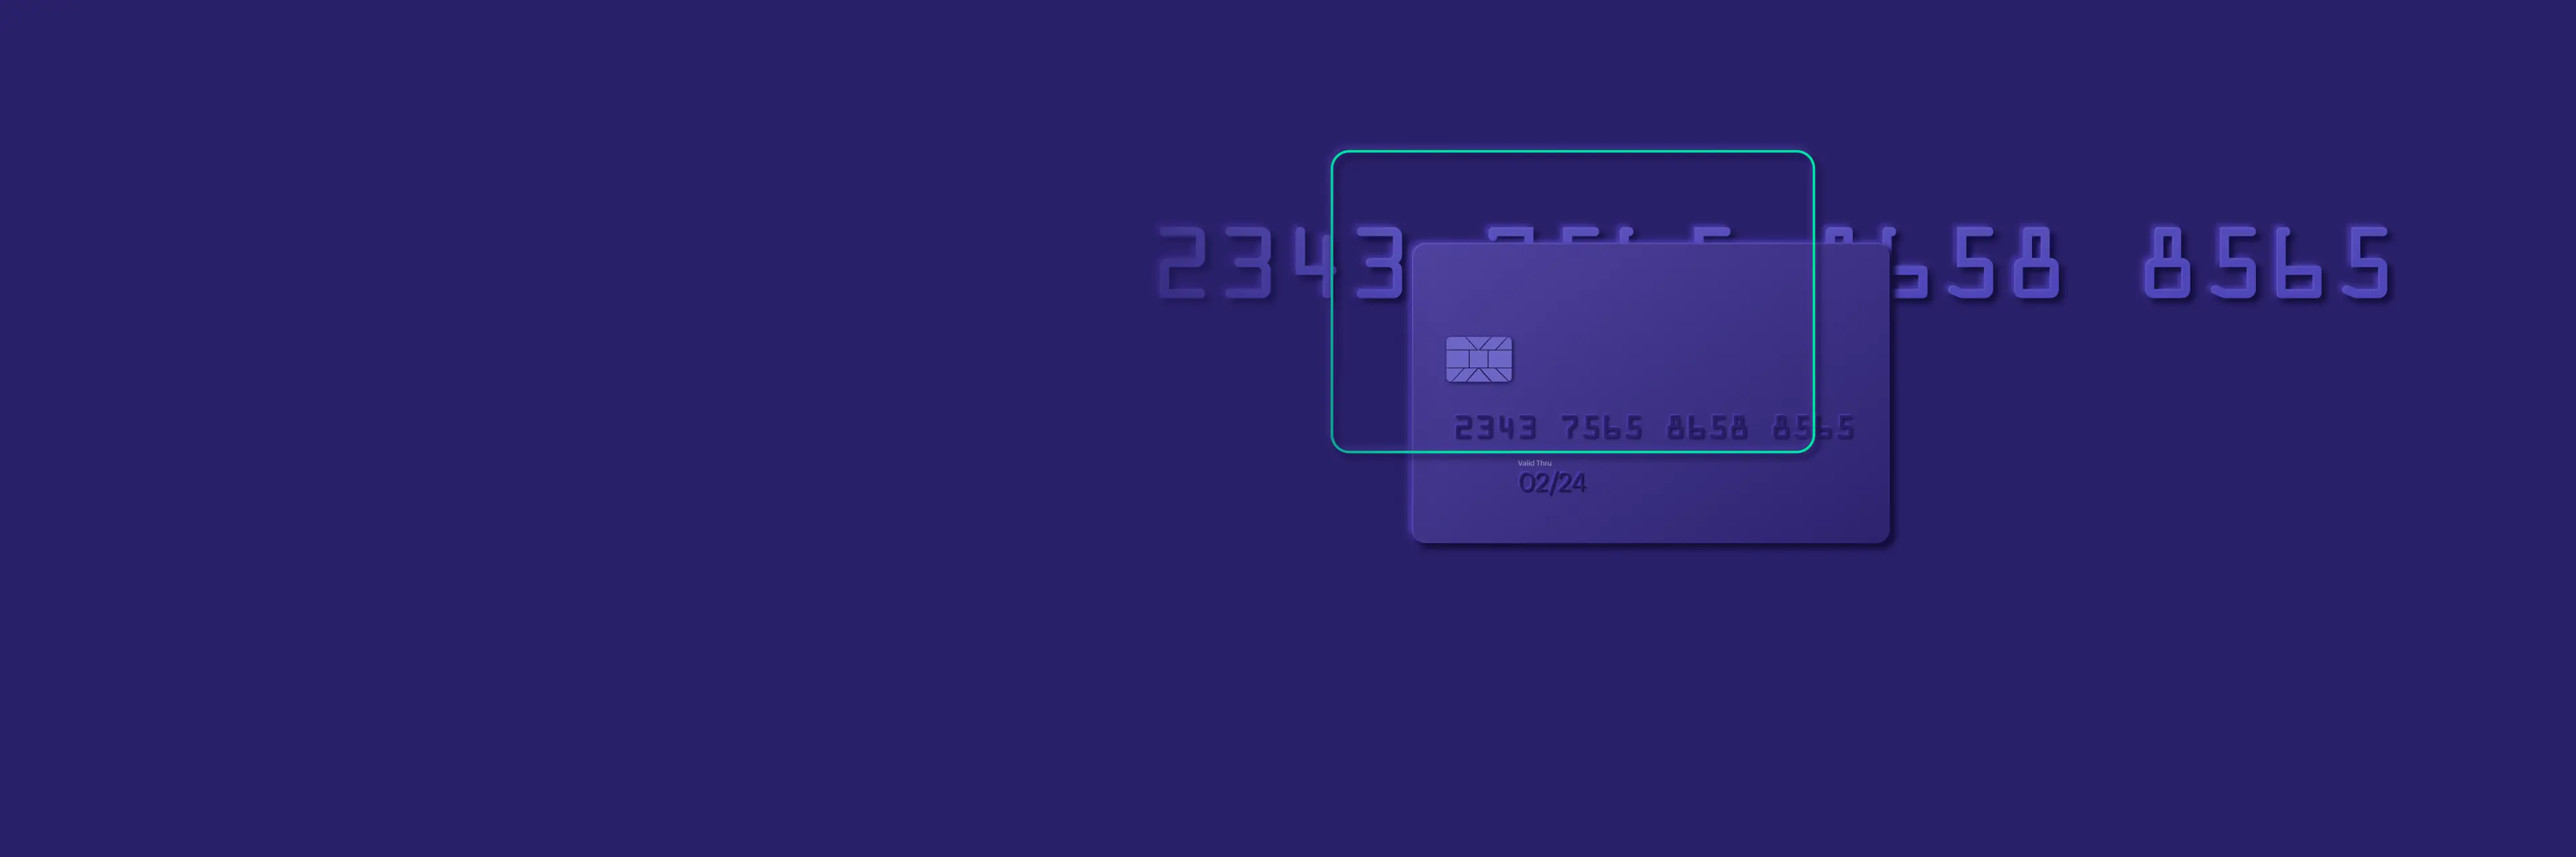 bg-pl-card-issuing@3x.png